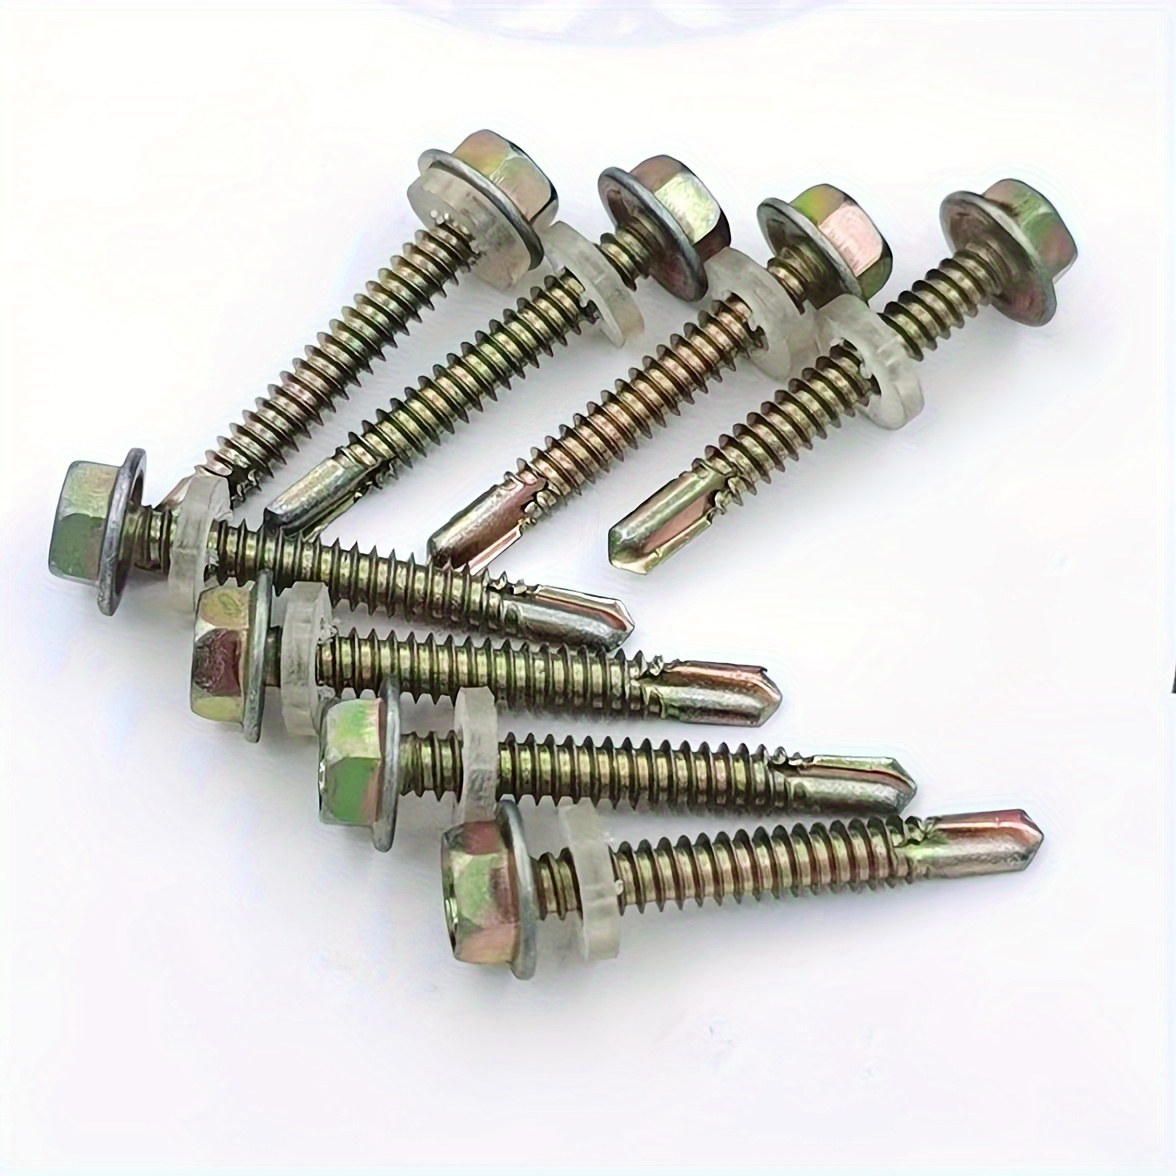 

50pcs Hex Washer Head Self-drilling Screws, 10# X 1" (4.8x25mm), Color Zinc Plated For Metal Roofing, Hexagonal Tail Screws For Steel Sheets